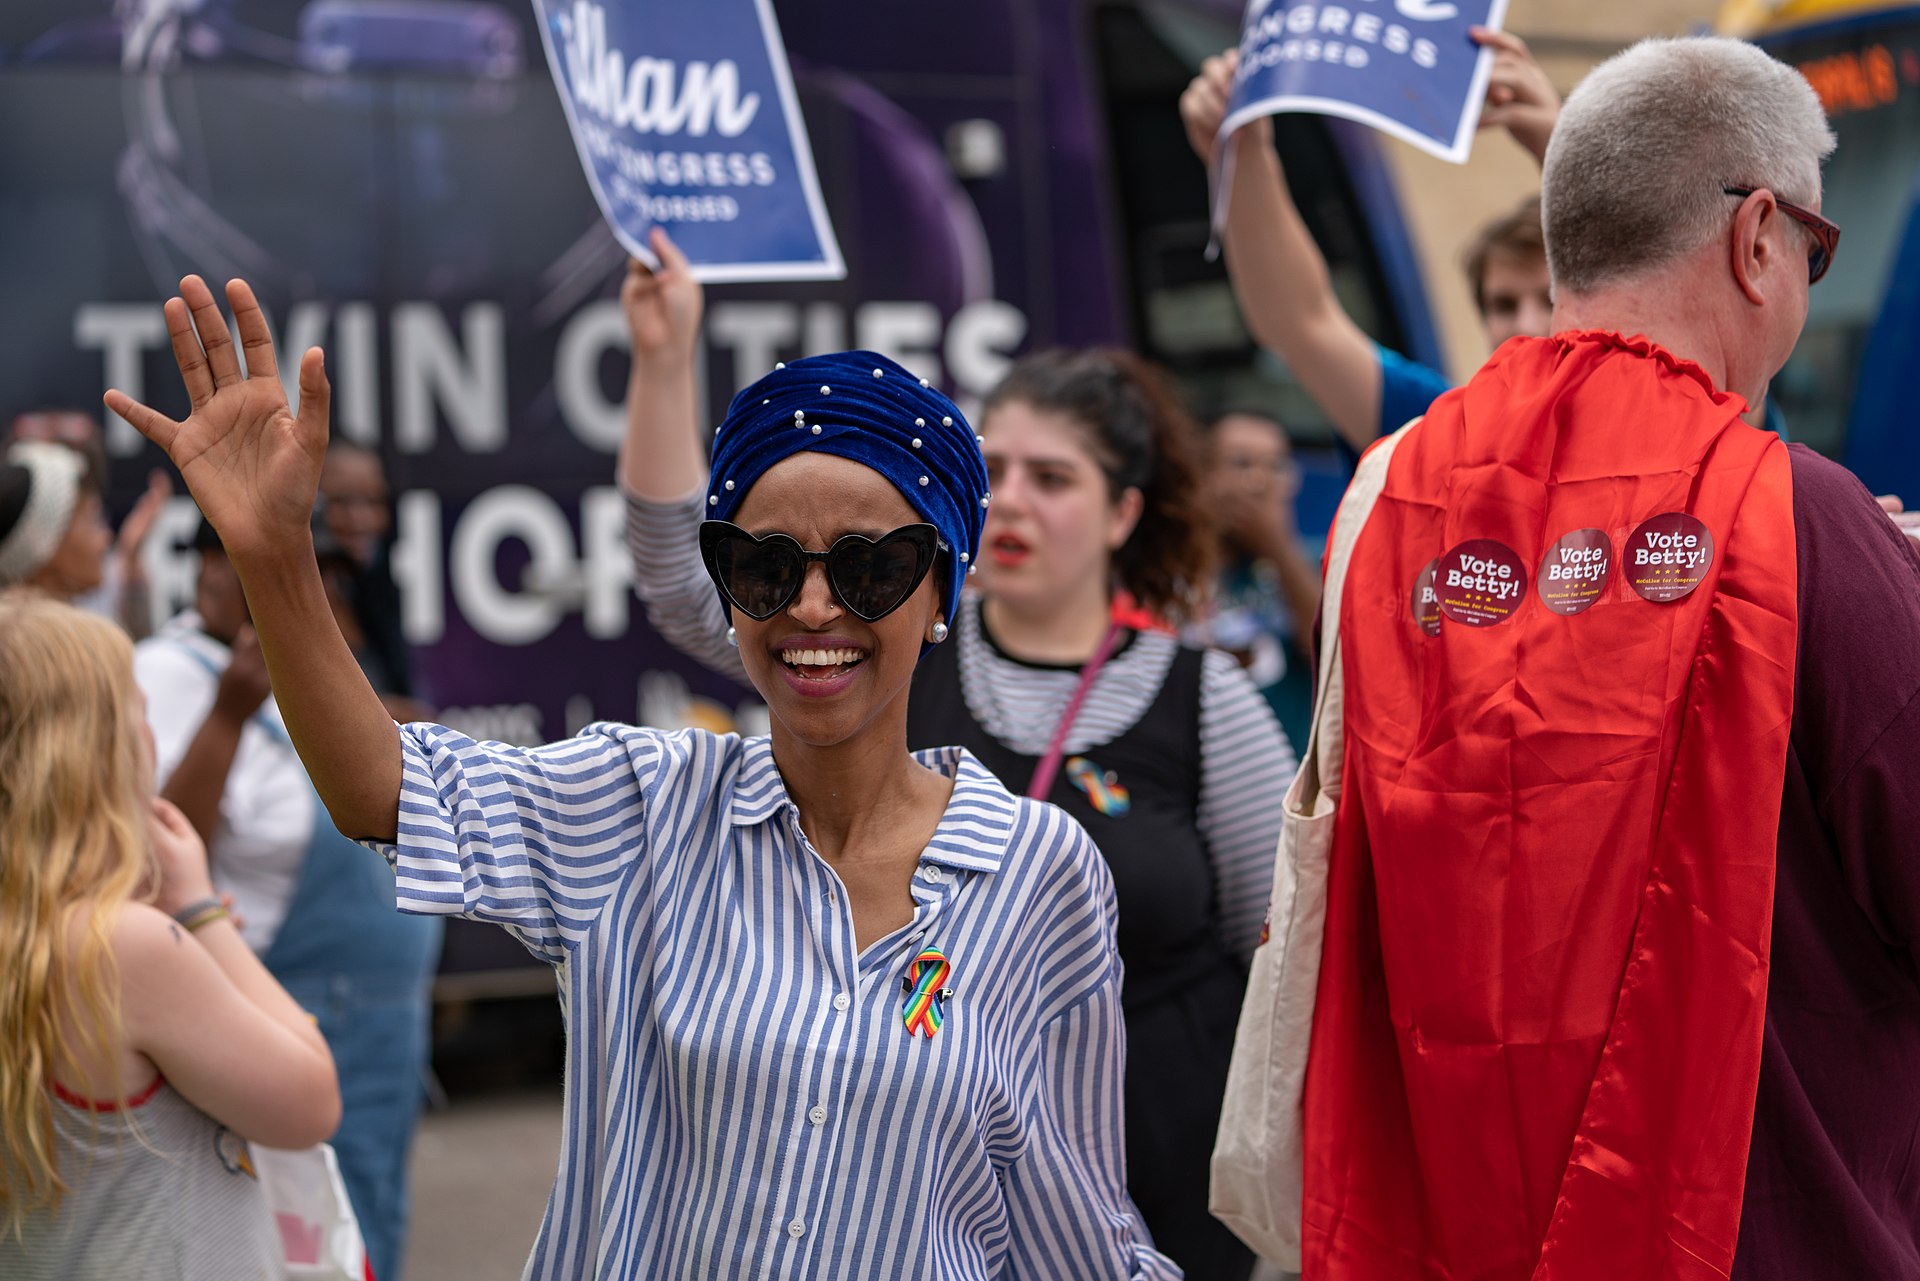 1920px-Ilhan_Omar_for_Congress_-_Twin_Cities_Pride_Parade_2018,_Minneapolis,_Minnesota_(28131759337)